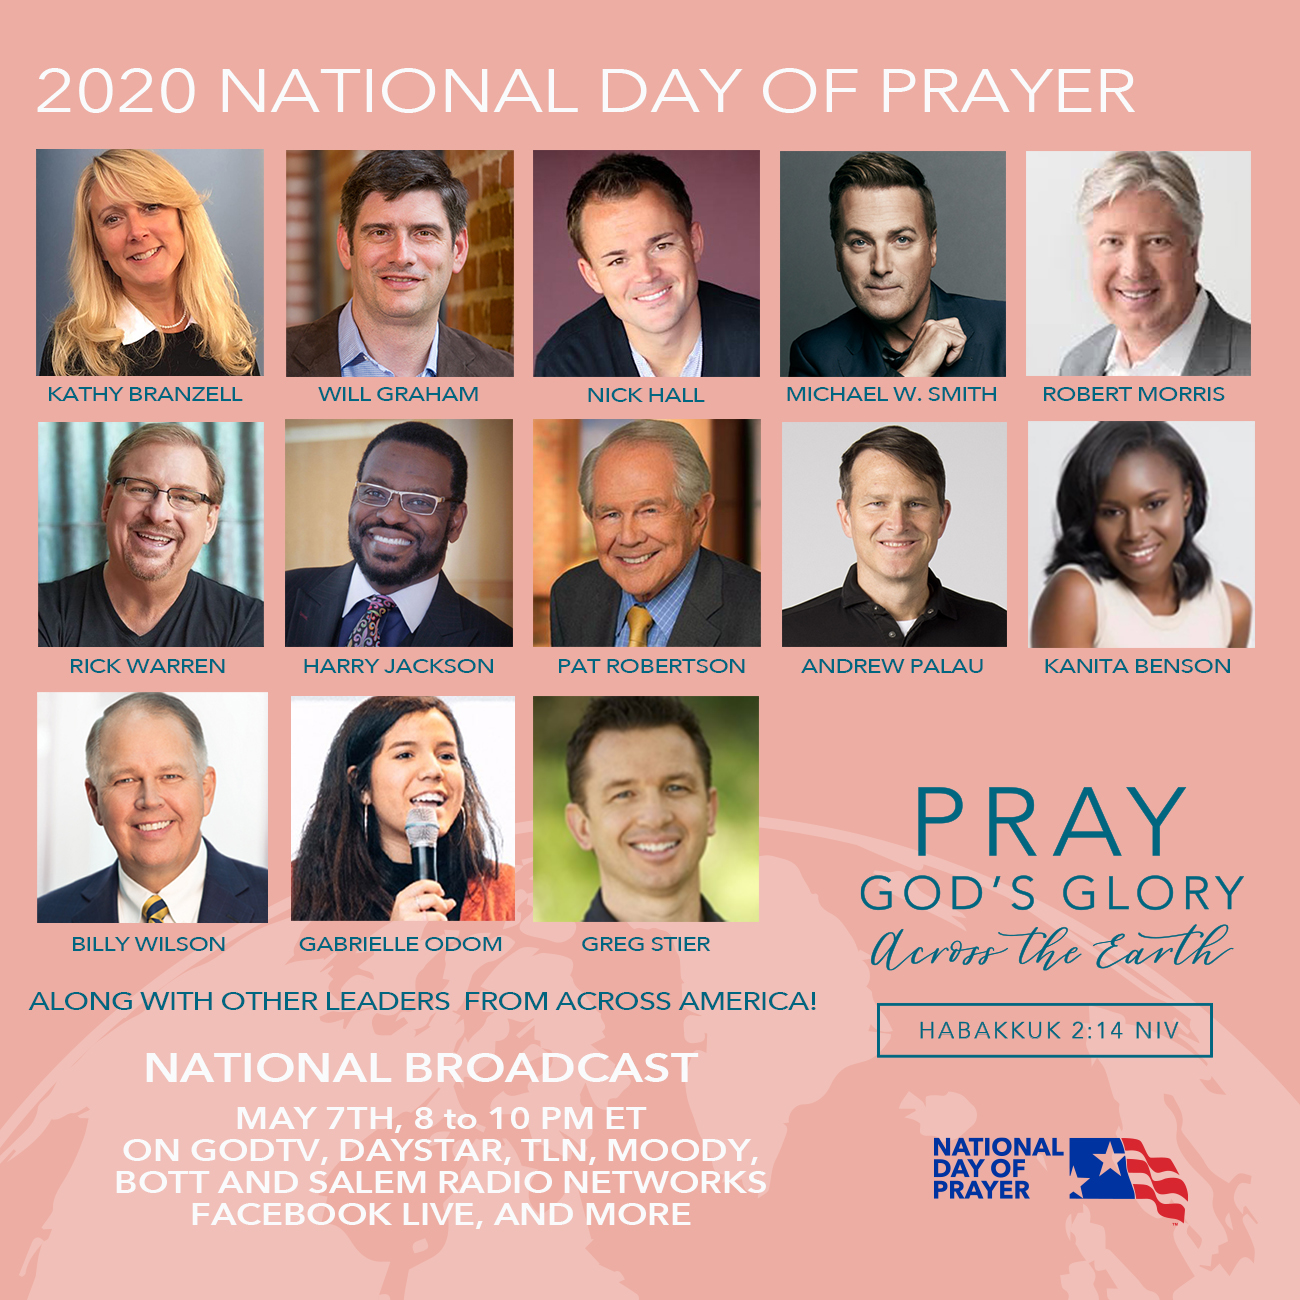 NATIONAL DAY OF PRAYER TASK FORCE JOIN US IN PRAYER TONIGHT AT 8 PM ET